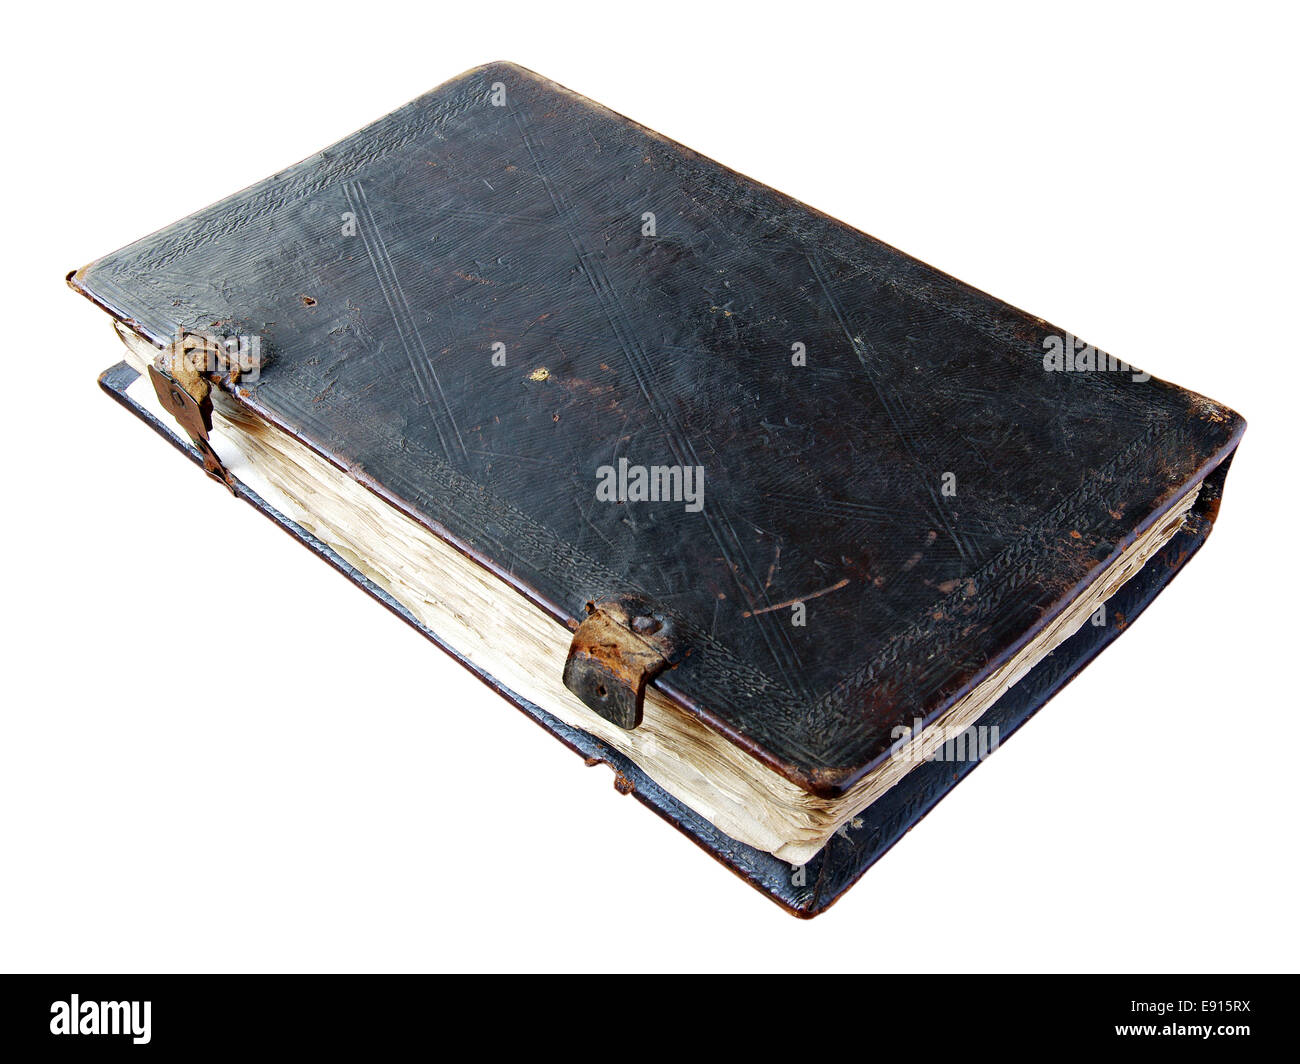 The ancient book Stock Photo